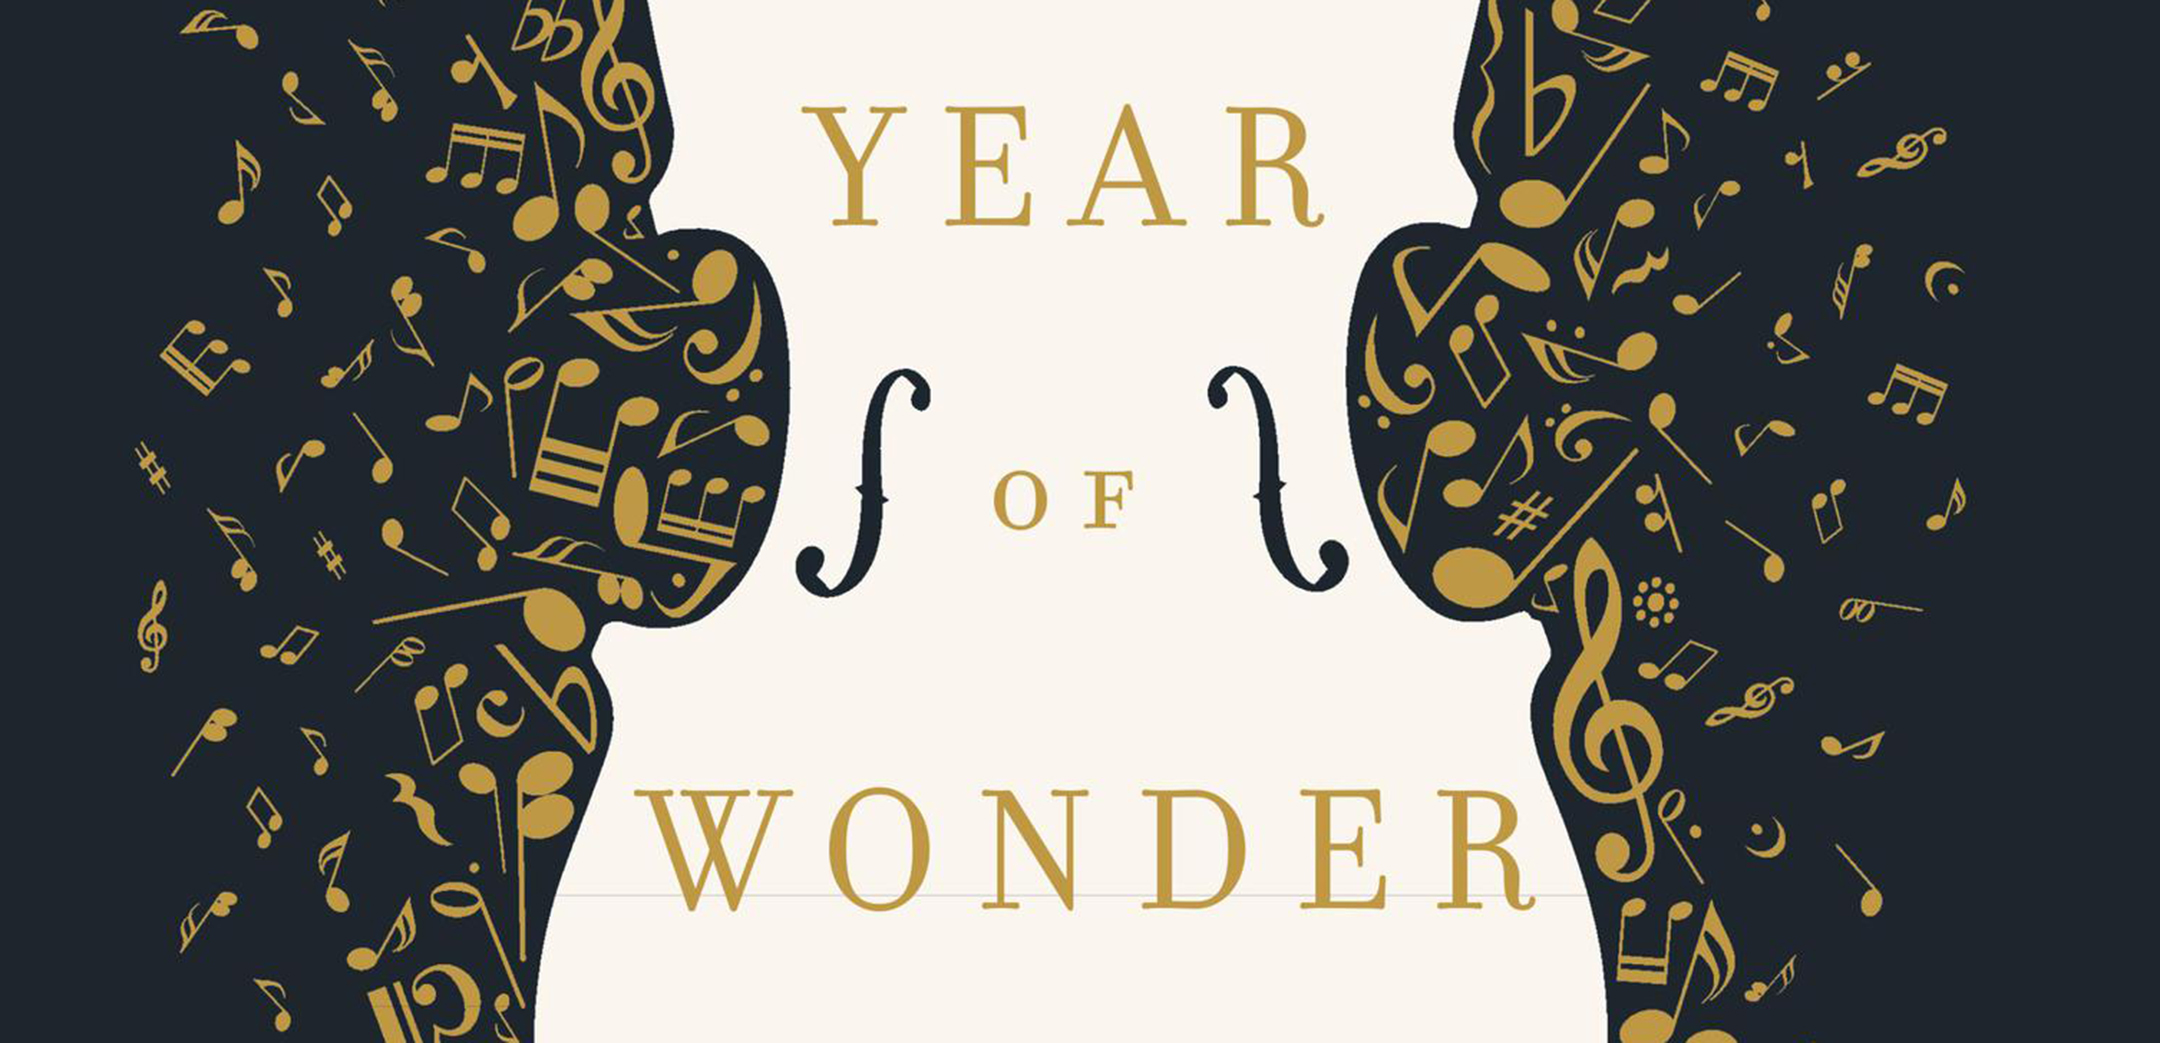 Detail of book cover for Year of Wonder, featuring an outline of a violin surrounded by musical notes with the title in the center